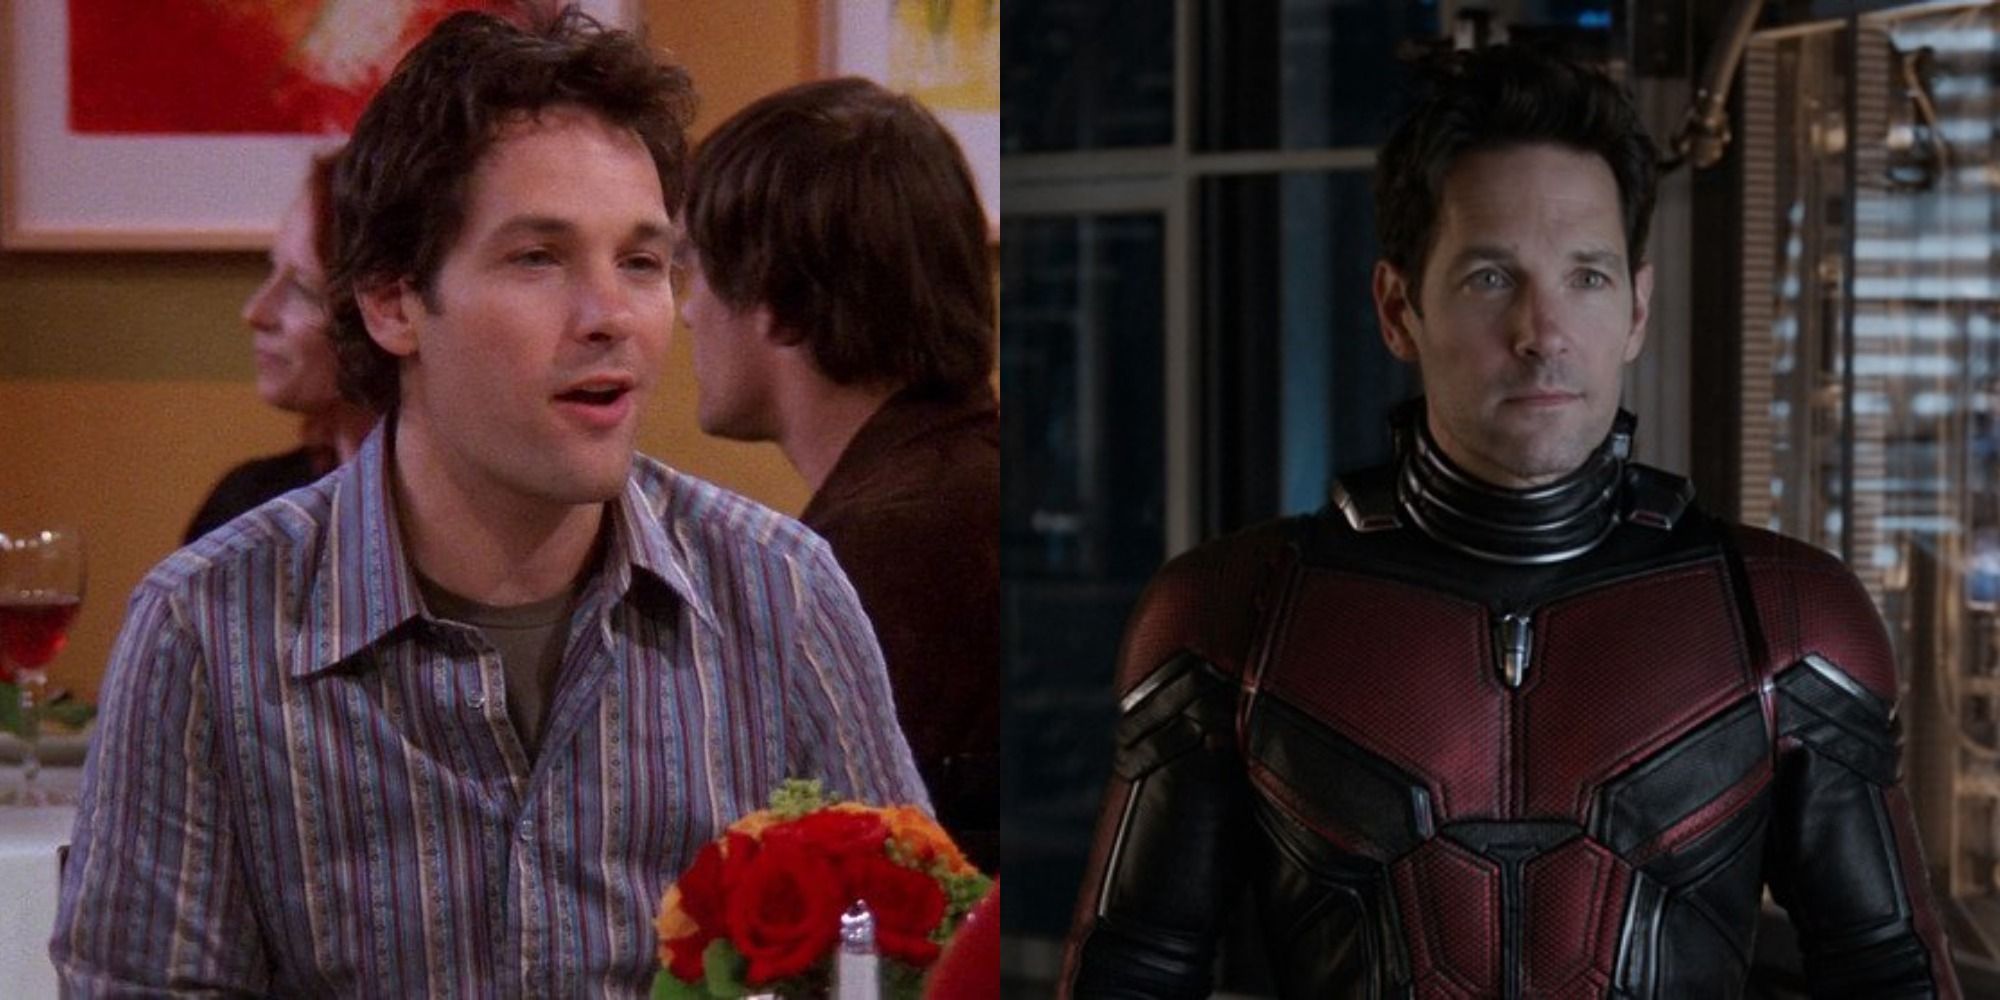 Paul Rudd in Friends and Ant-Man